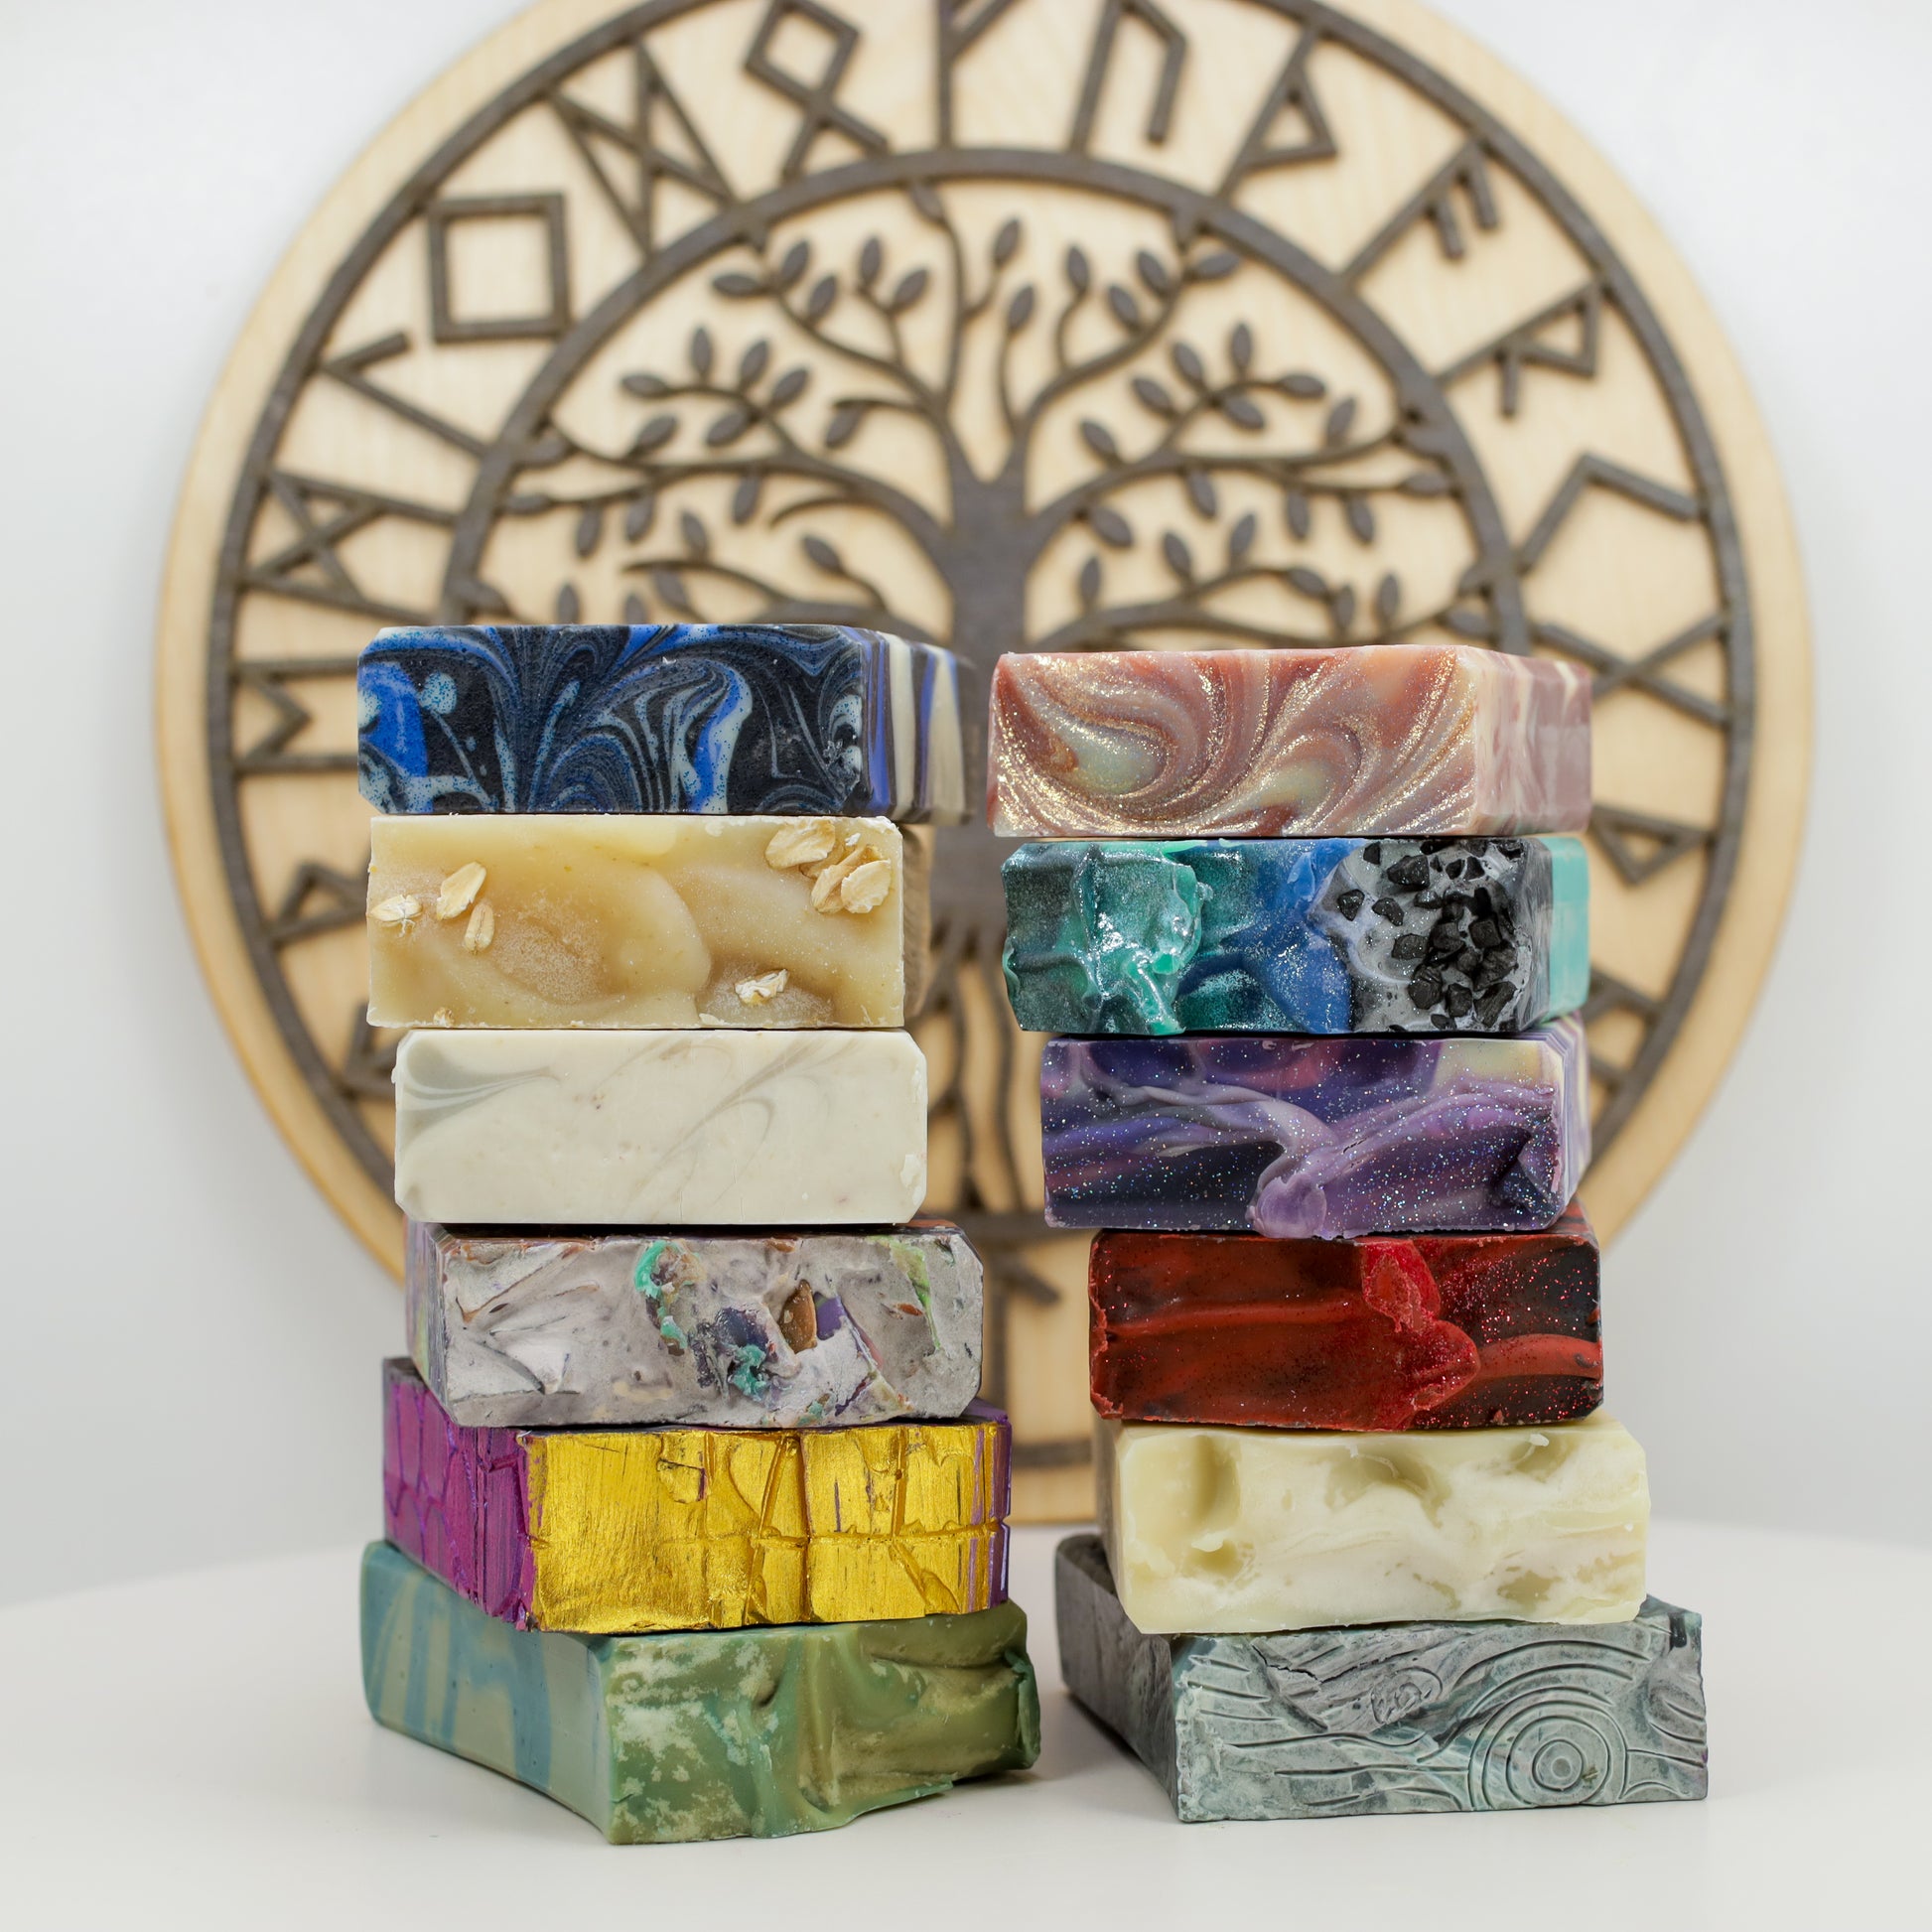 Soap For A Year - 8 or 12 Pack Full Bar Box, Birds of Valhalla, Variety Pack, Birds of Valhalla